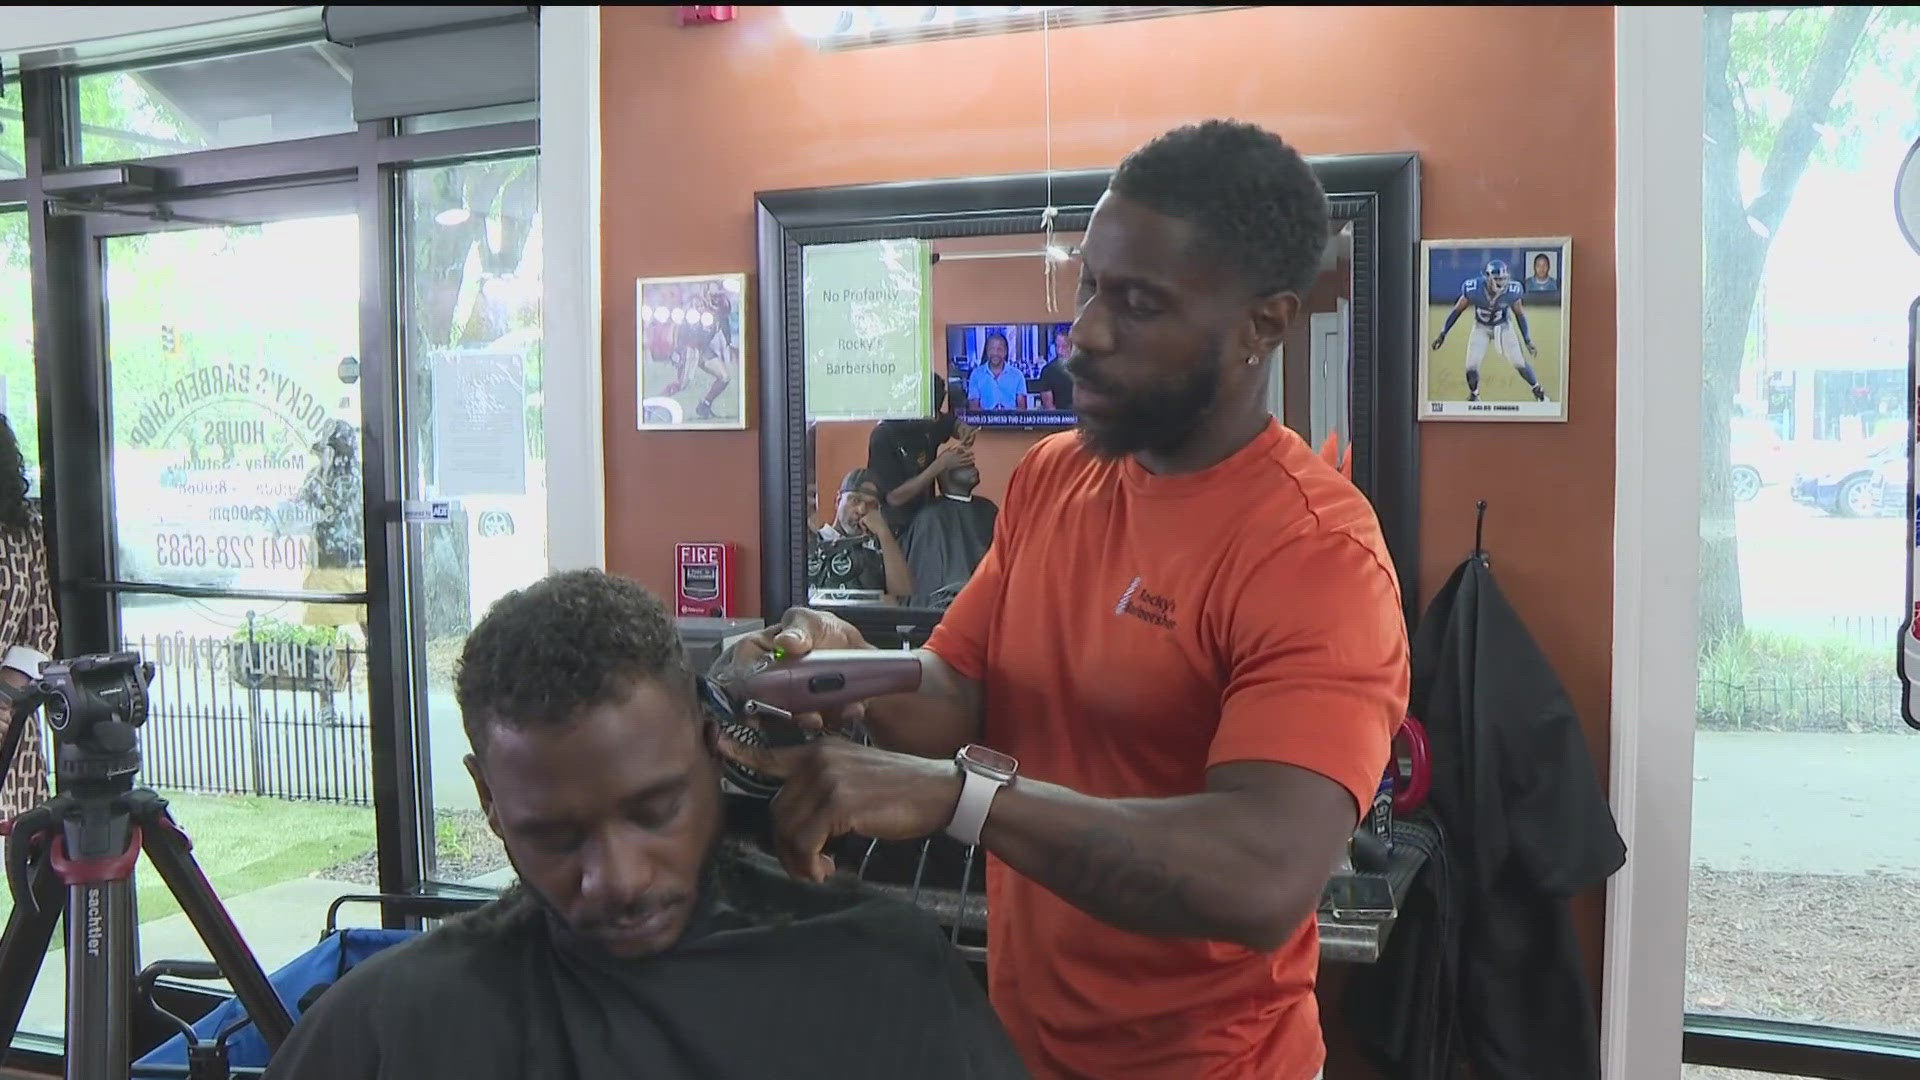 The Trump Campaign is responding after an Atlanta barbershop owner said he was misled when he agreed to a host campaign for the former president.